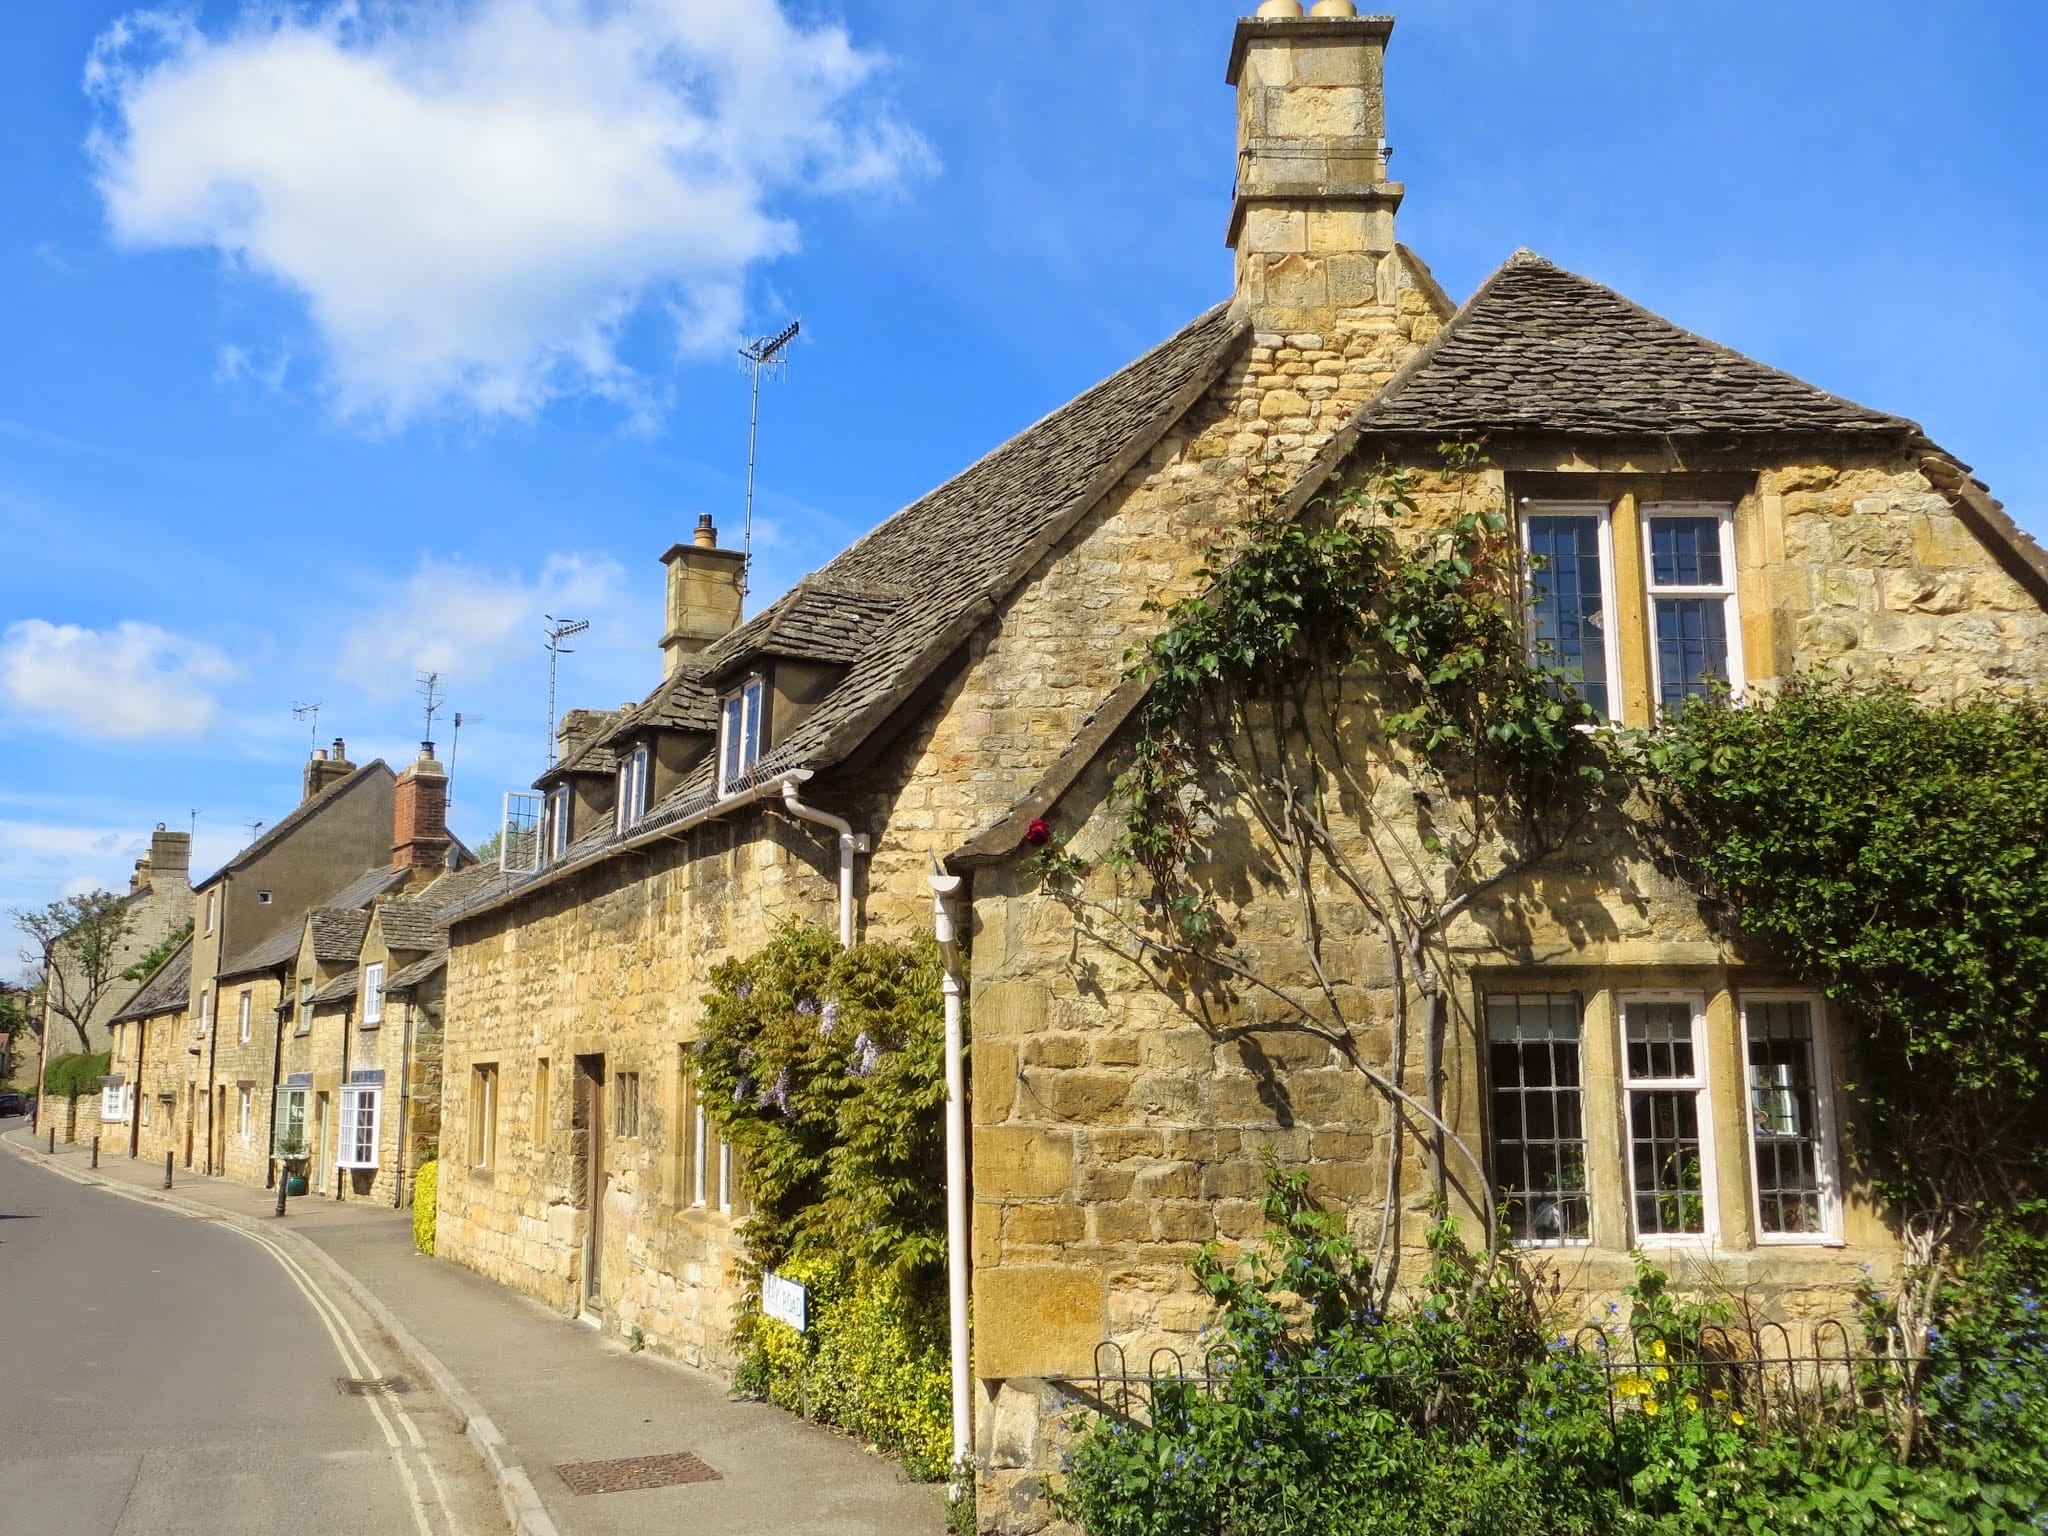 Typically British village on the Cotswold Way